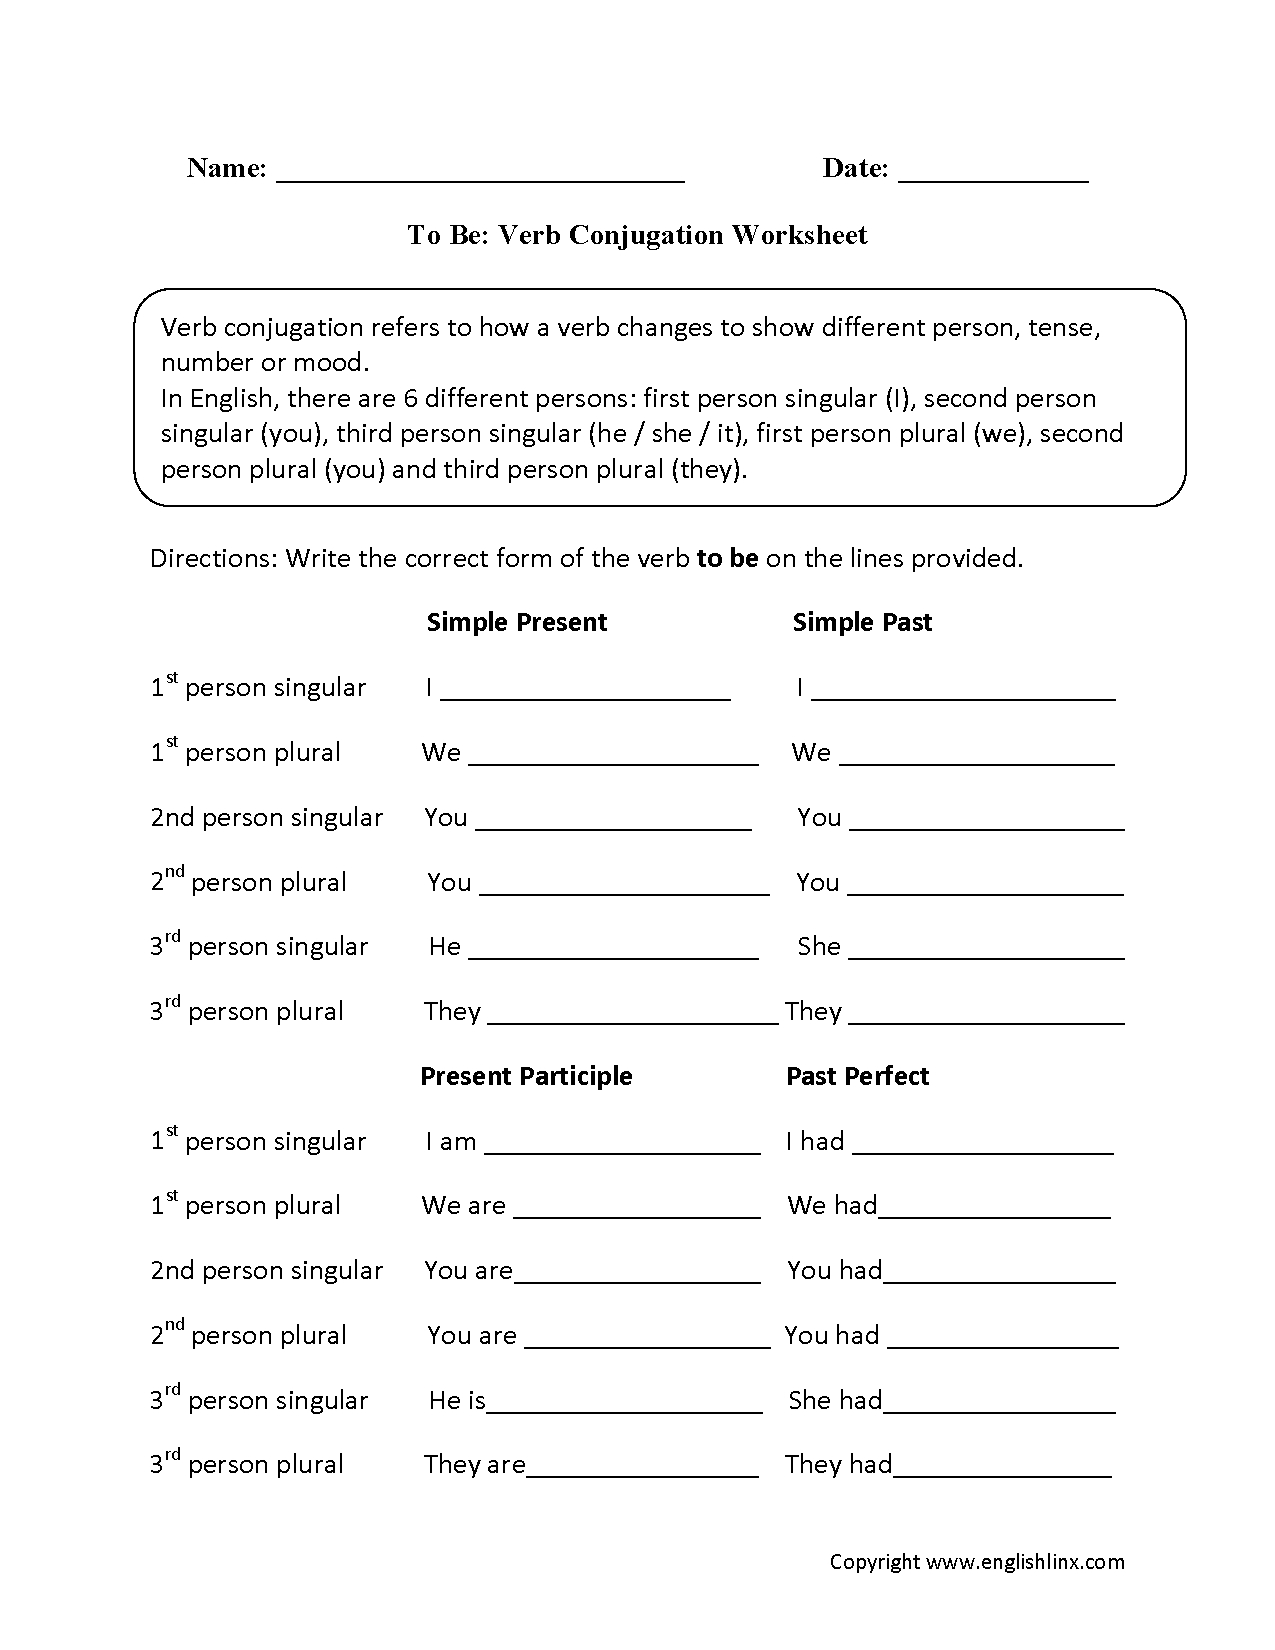 Types Of Verbs Worksheet For Class 6